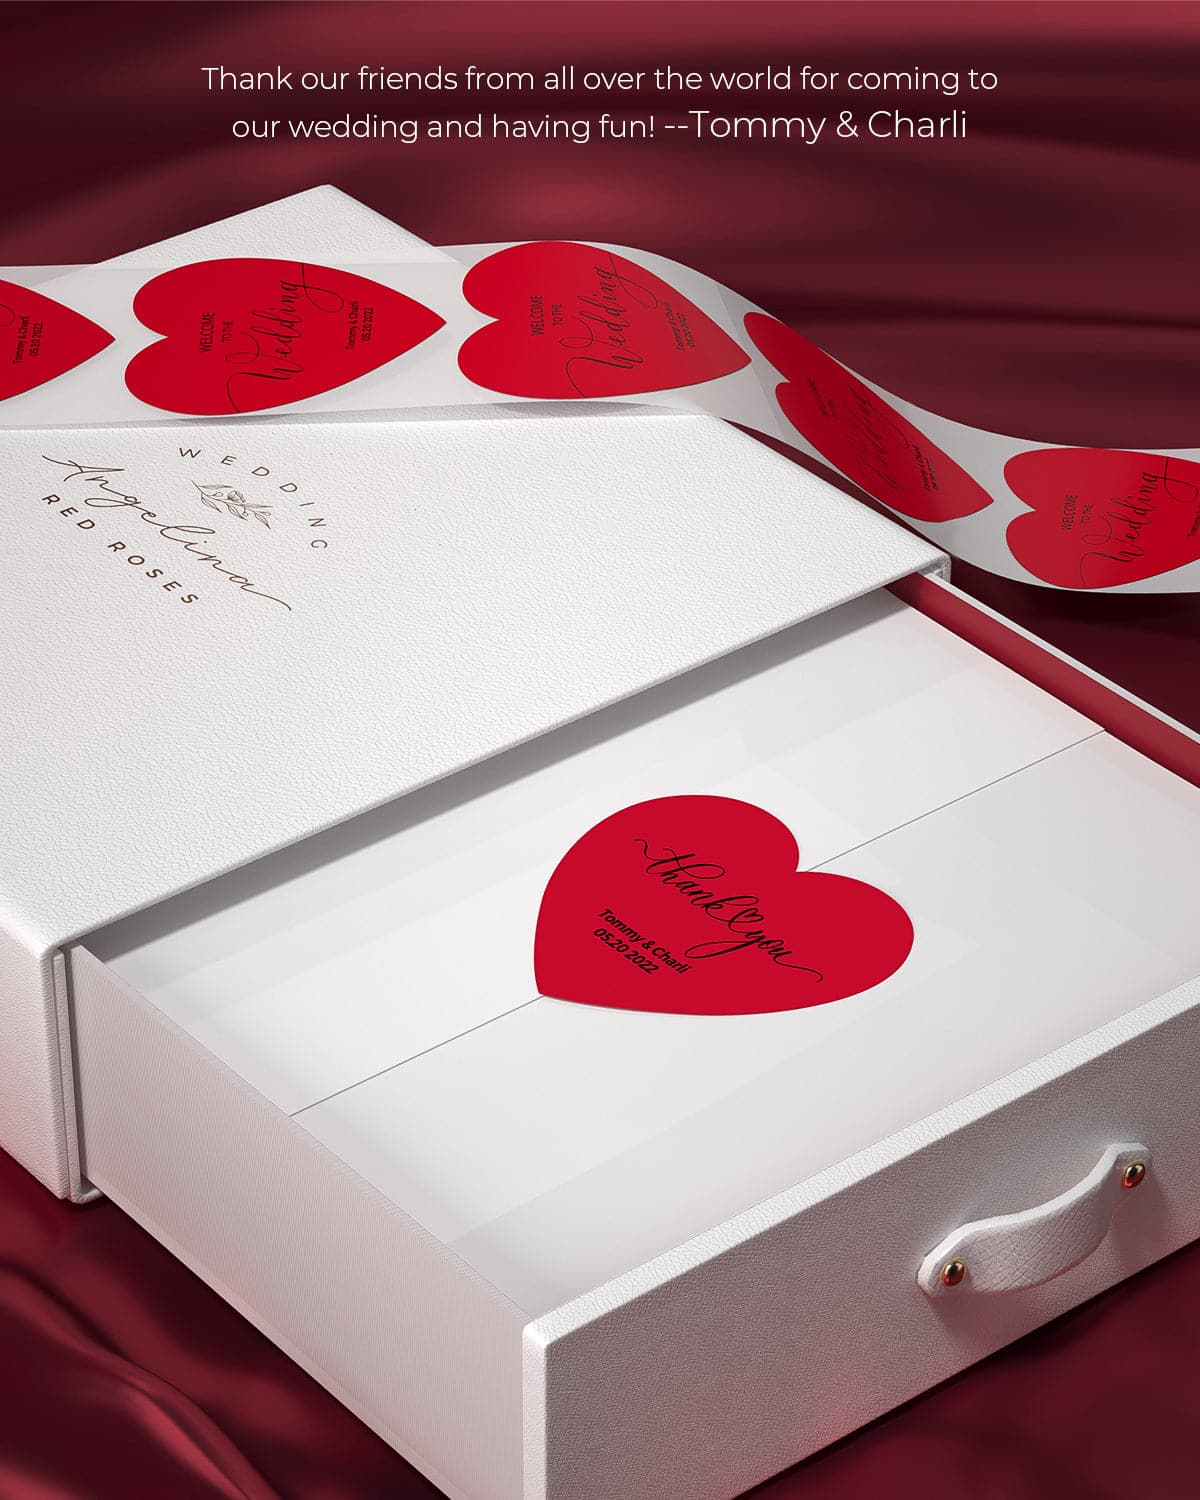 MUNBYN red heart-shaped stickers can be used as thank-you stickers on the boxes.